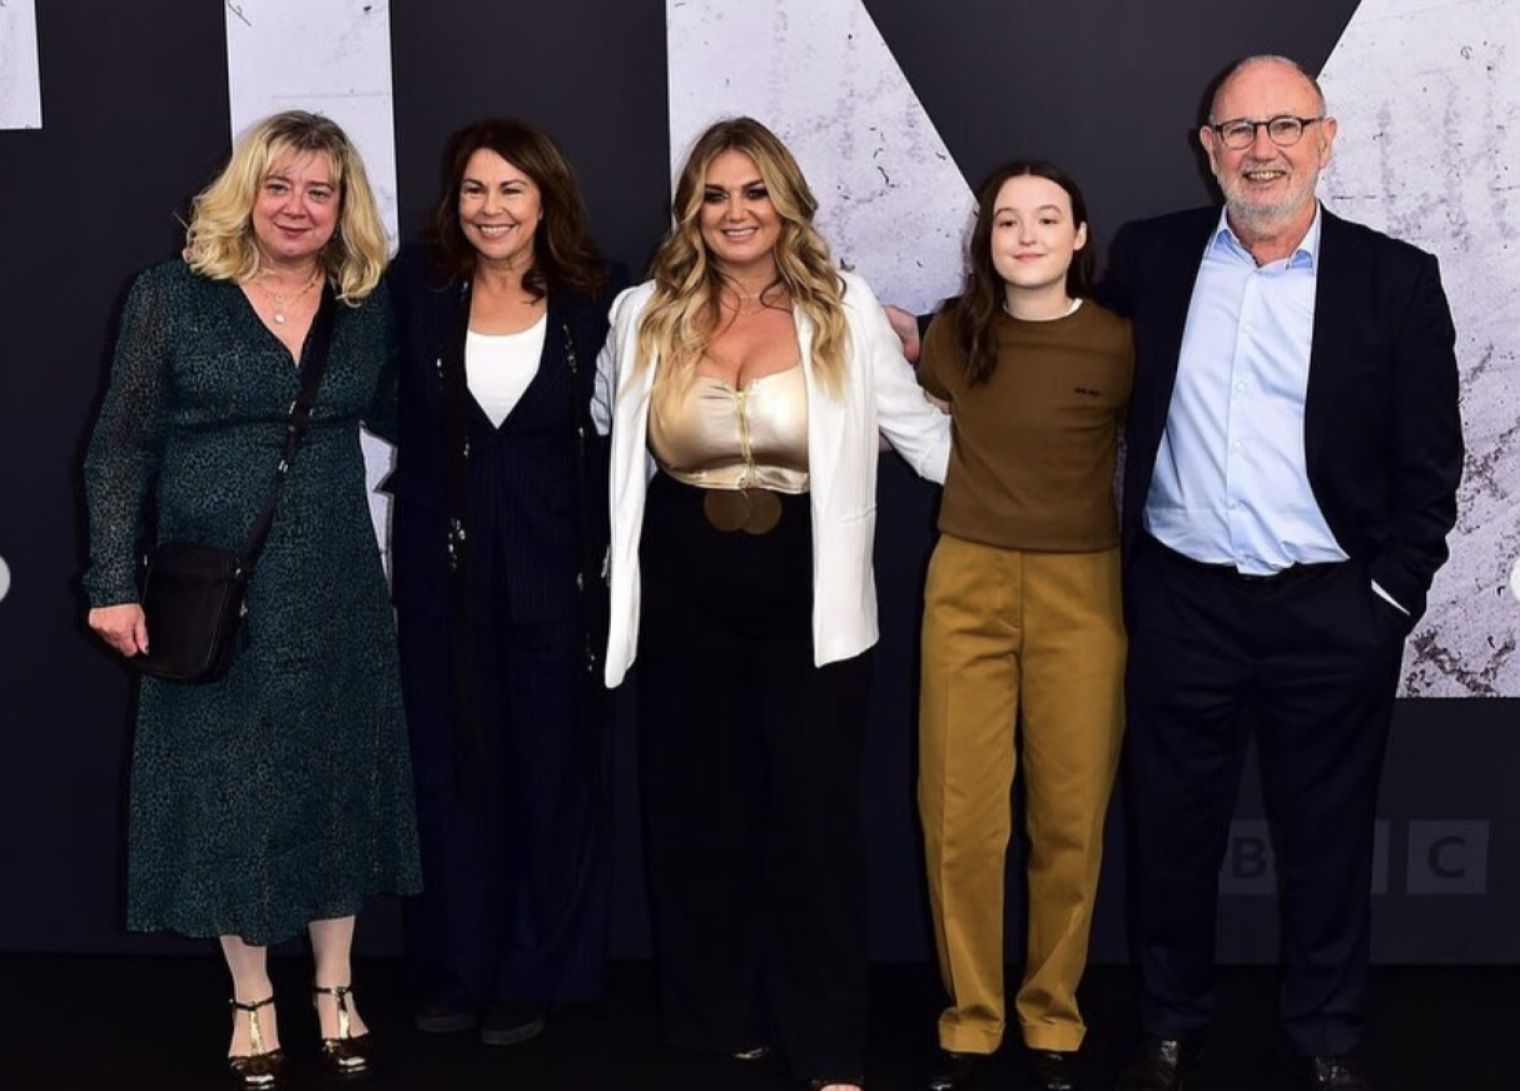  Faye McKeever attended last night's Liverpool premiere of the second series of BBC BAFTA winning drama series ‘Time’ which is set in a women’s prison